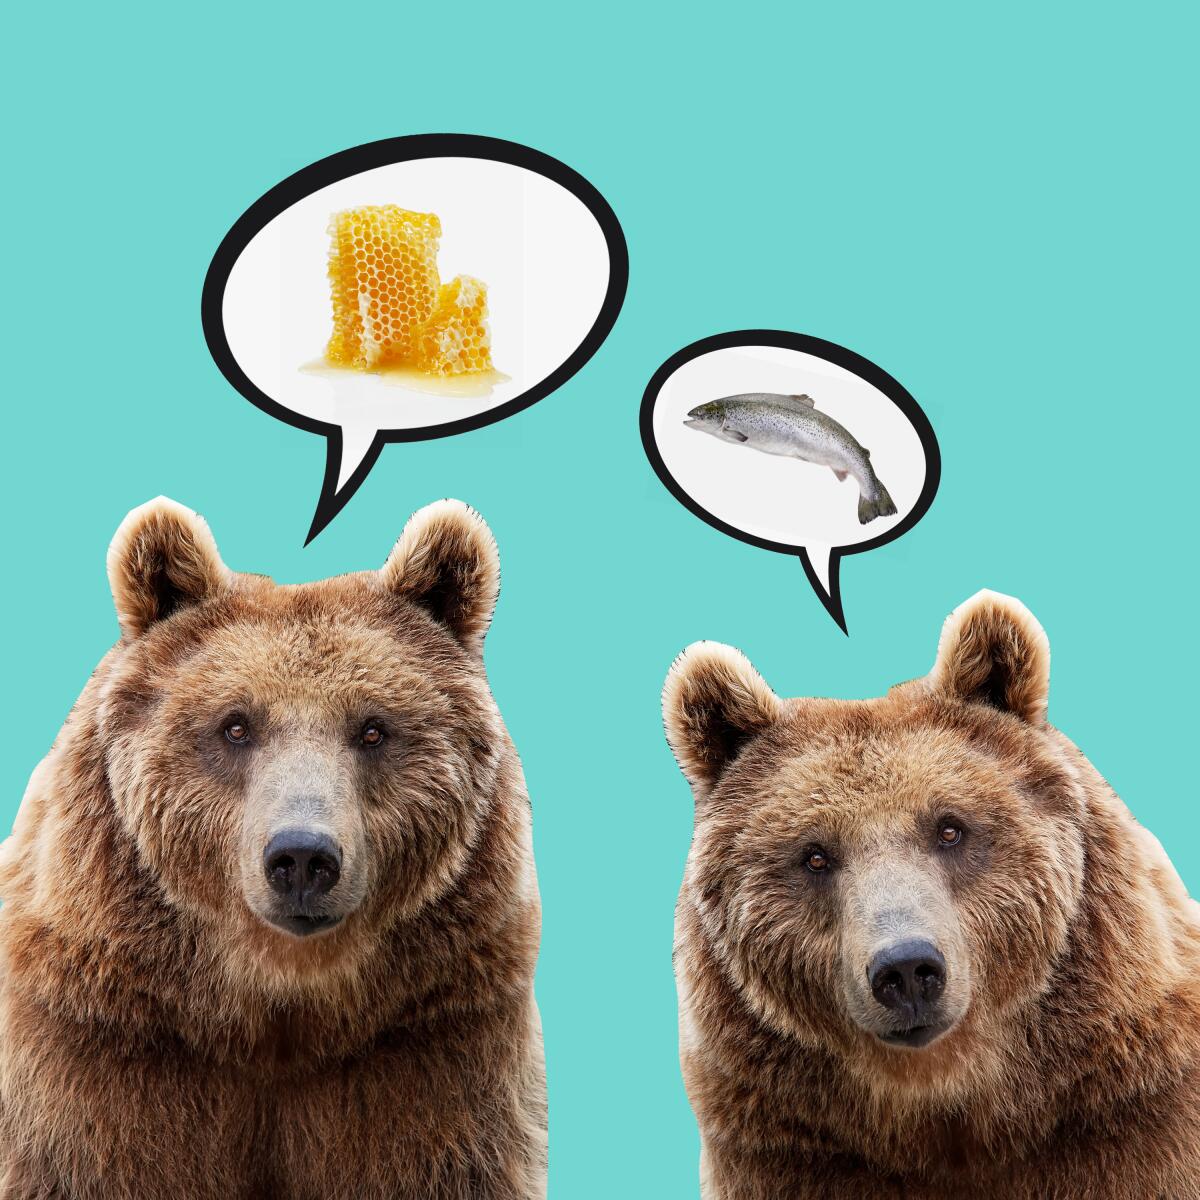 An illustration of bears with thought bubbles of honey and fish